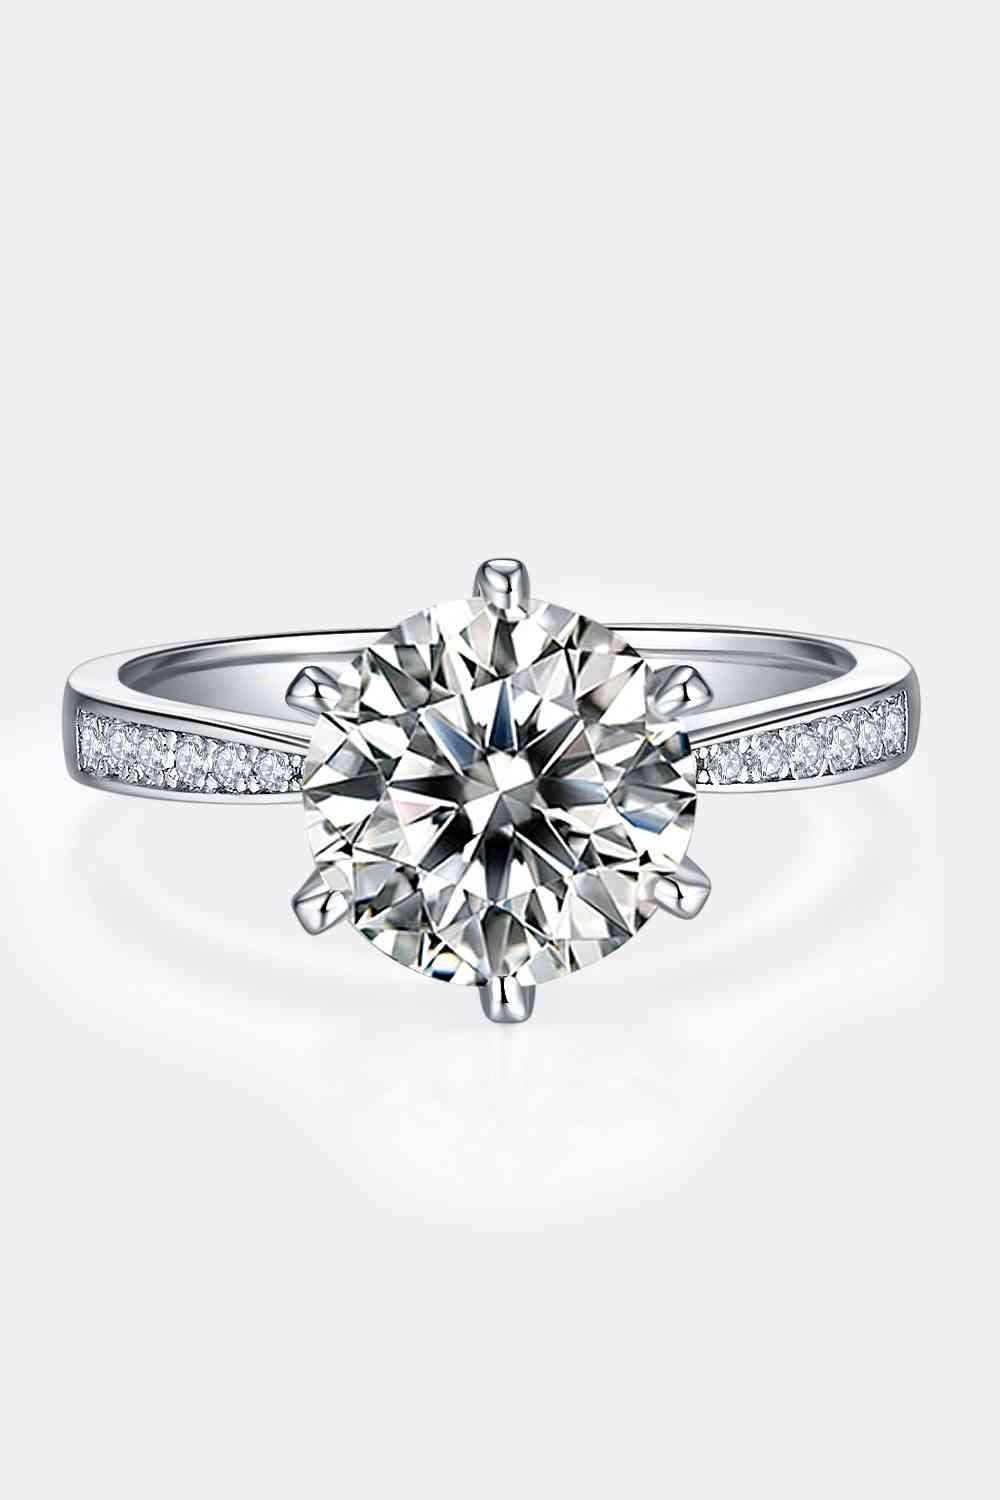 a diamond engagement ring with channel set diamonds